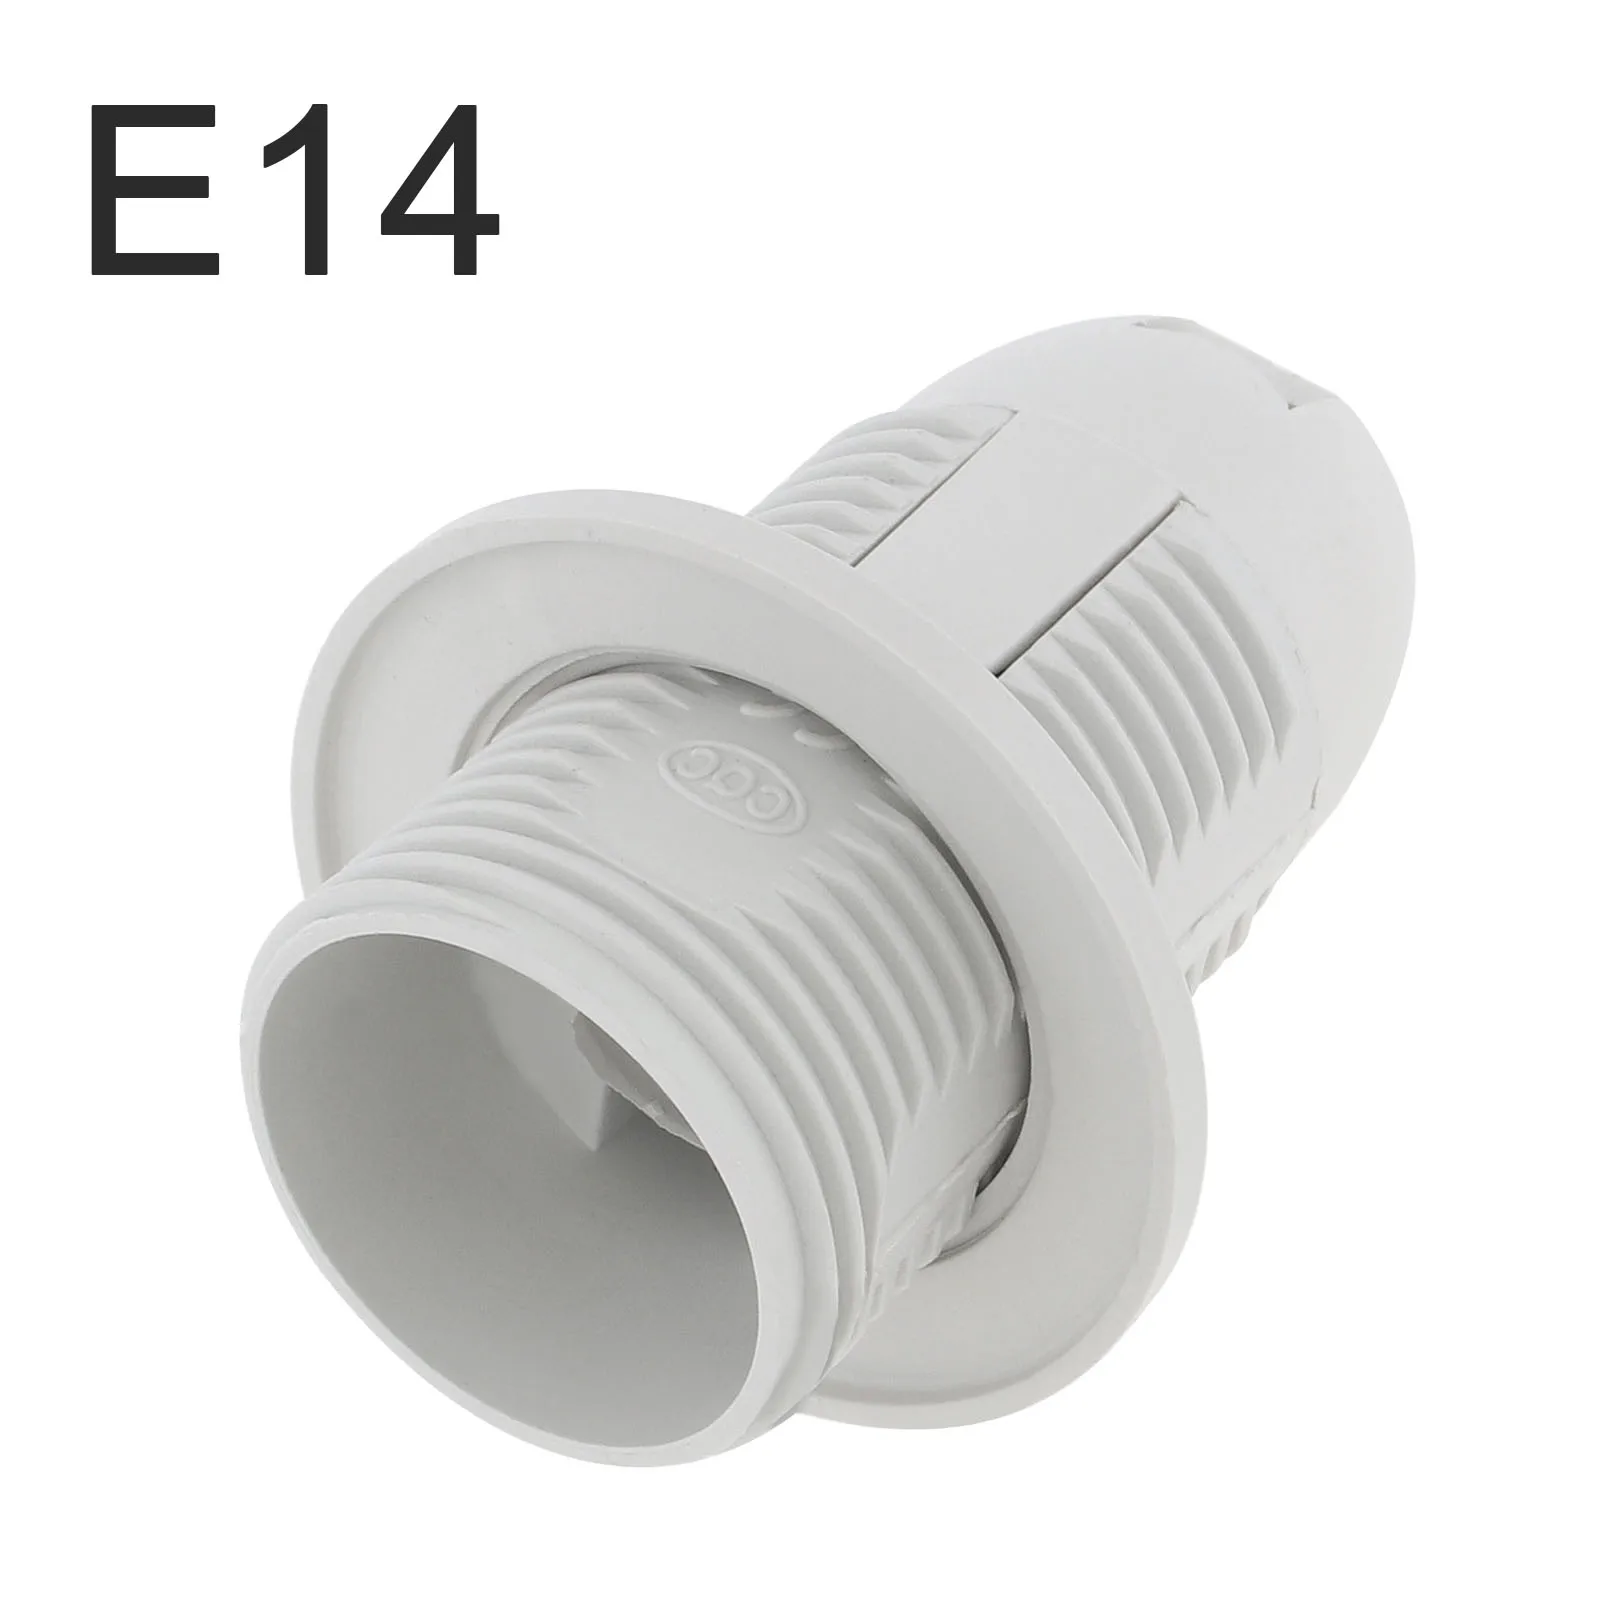 E14 Lamp Holder Edison Screw Lamp Holder Base Insulating Plastic Shell Light Bulb Socket optical fiber protection box leather wire optical cable heat shrinkable tube protective box insulating plastic waterproofing